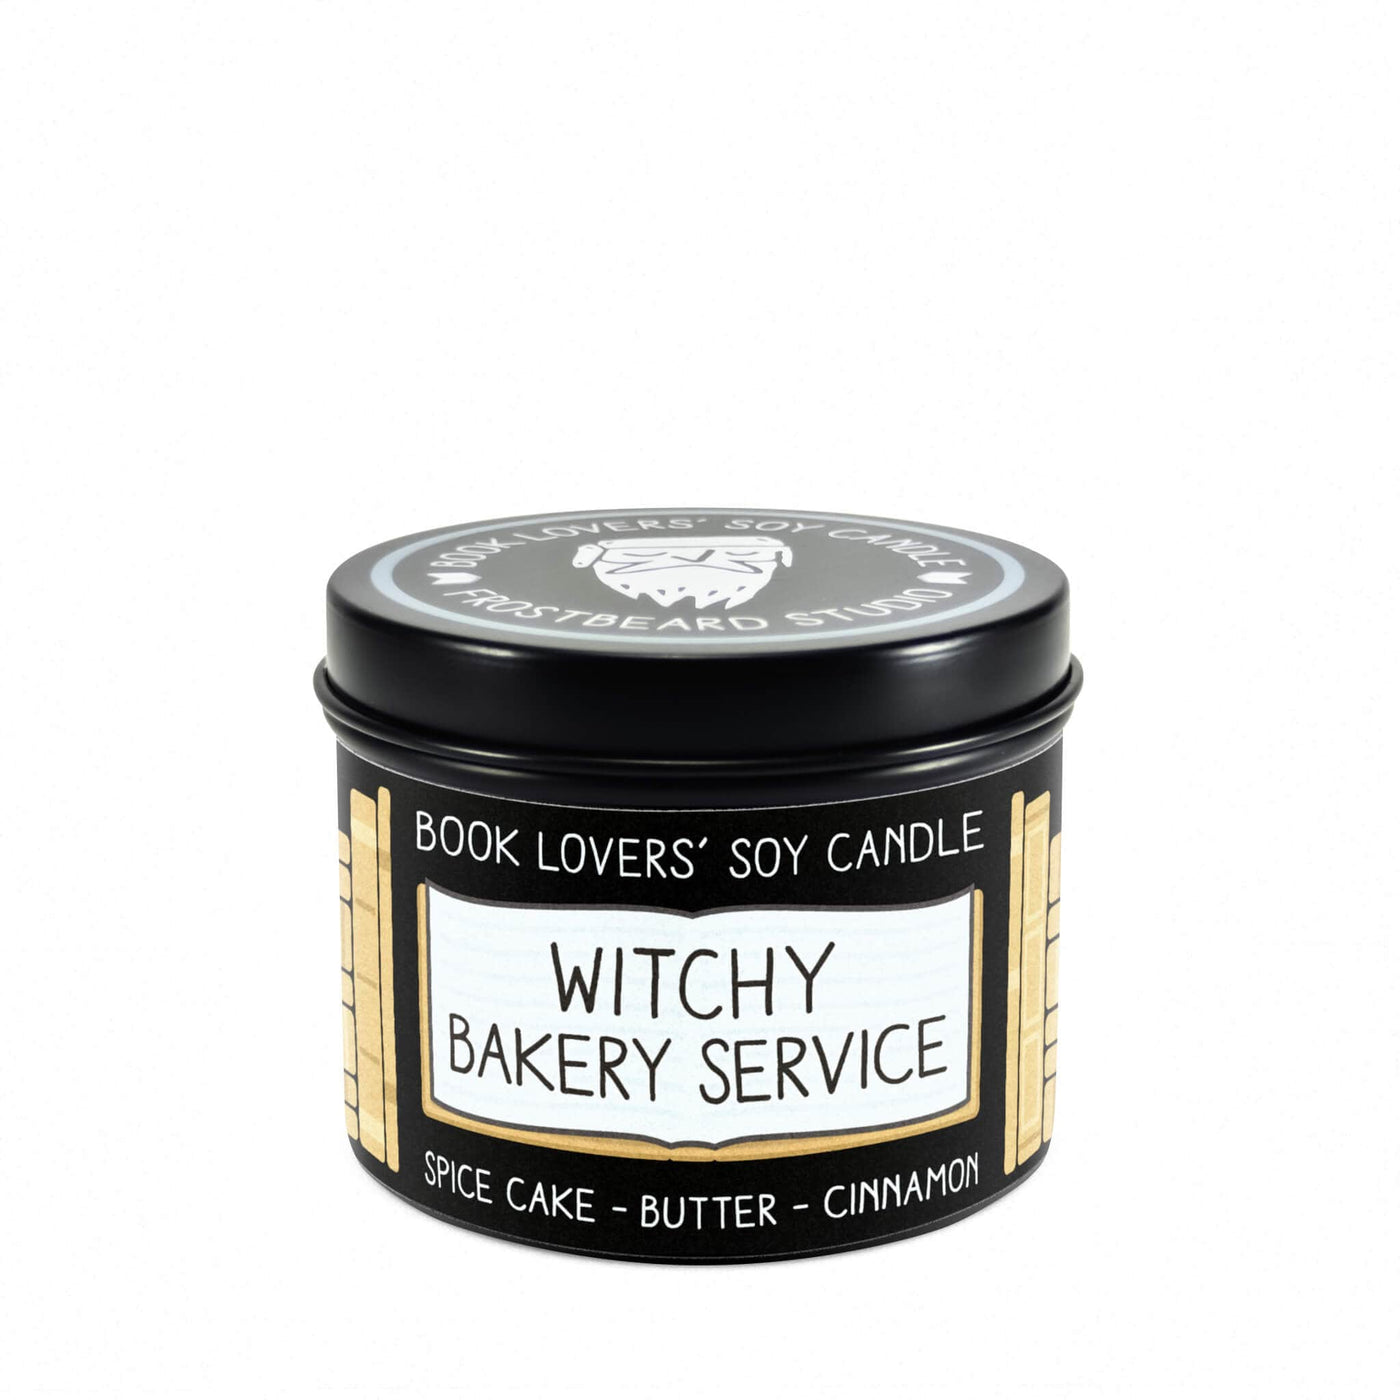 Witchy Bakery Service - 4 oz Tin - Book Lovers' Soy Candle - Frostbeard Studio